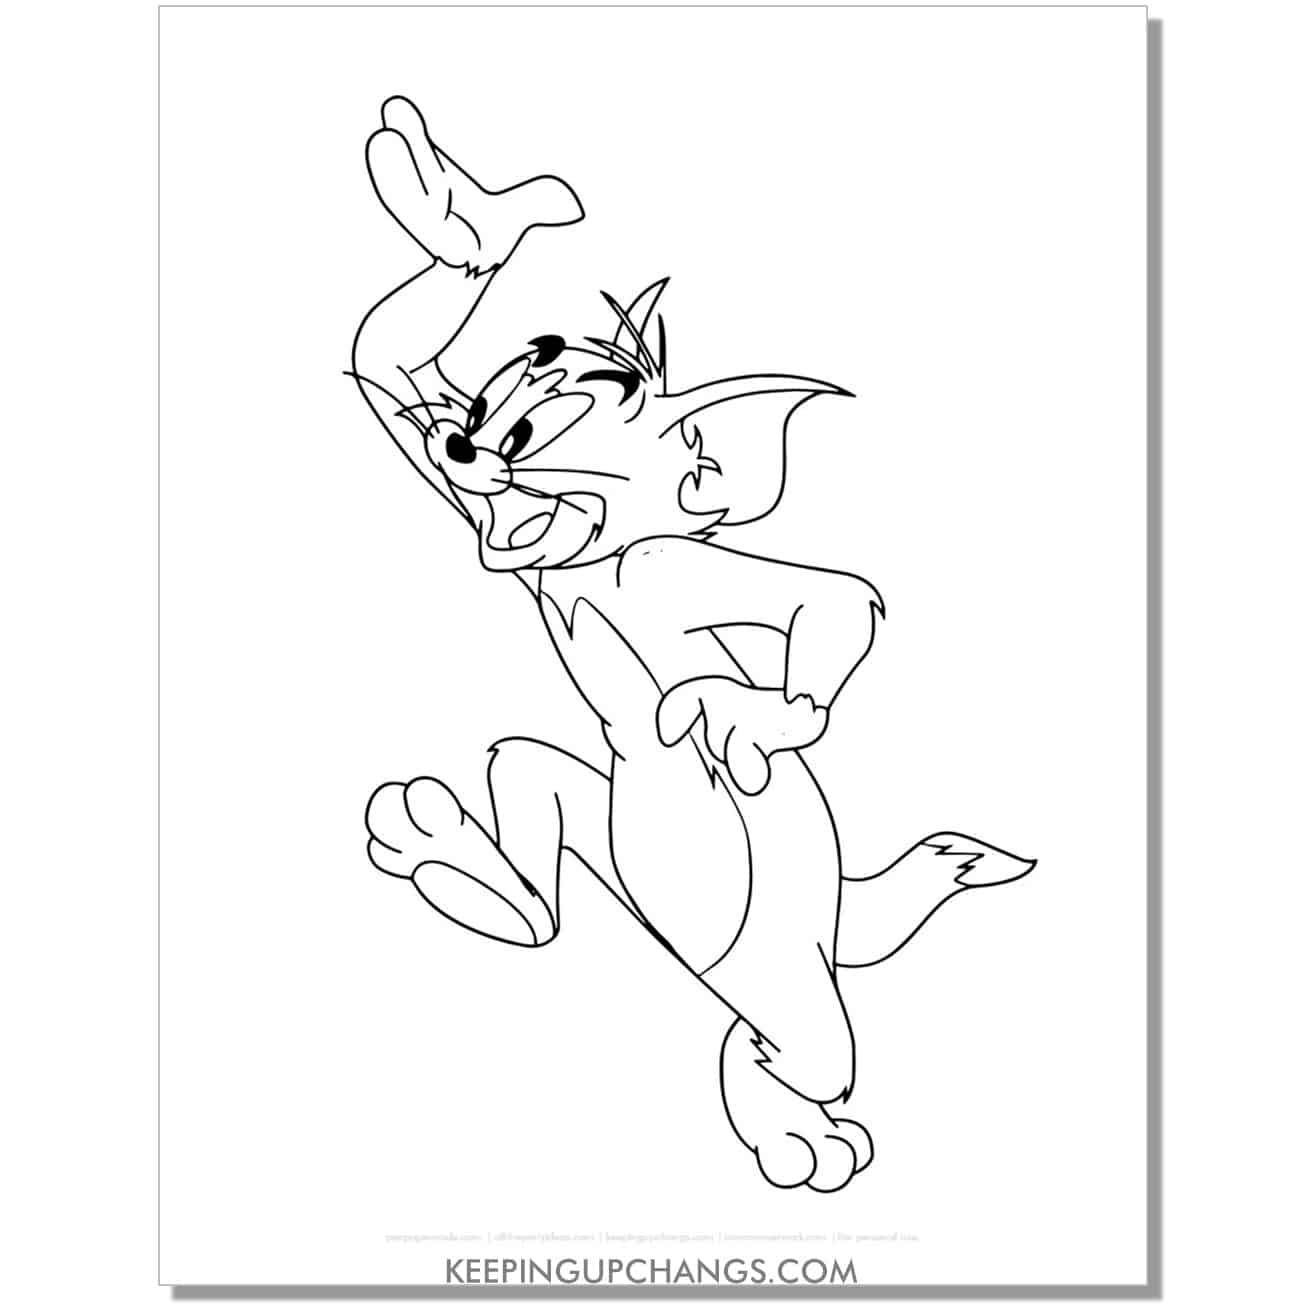 free tom carrying tray hand motion coloring page.